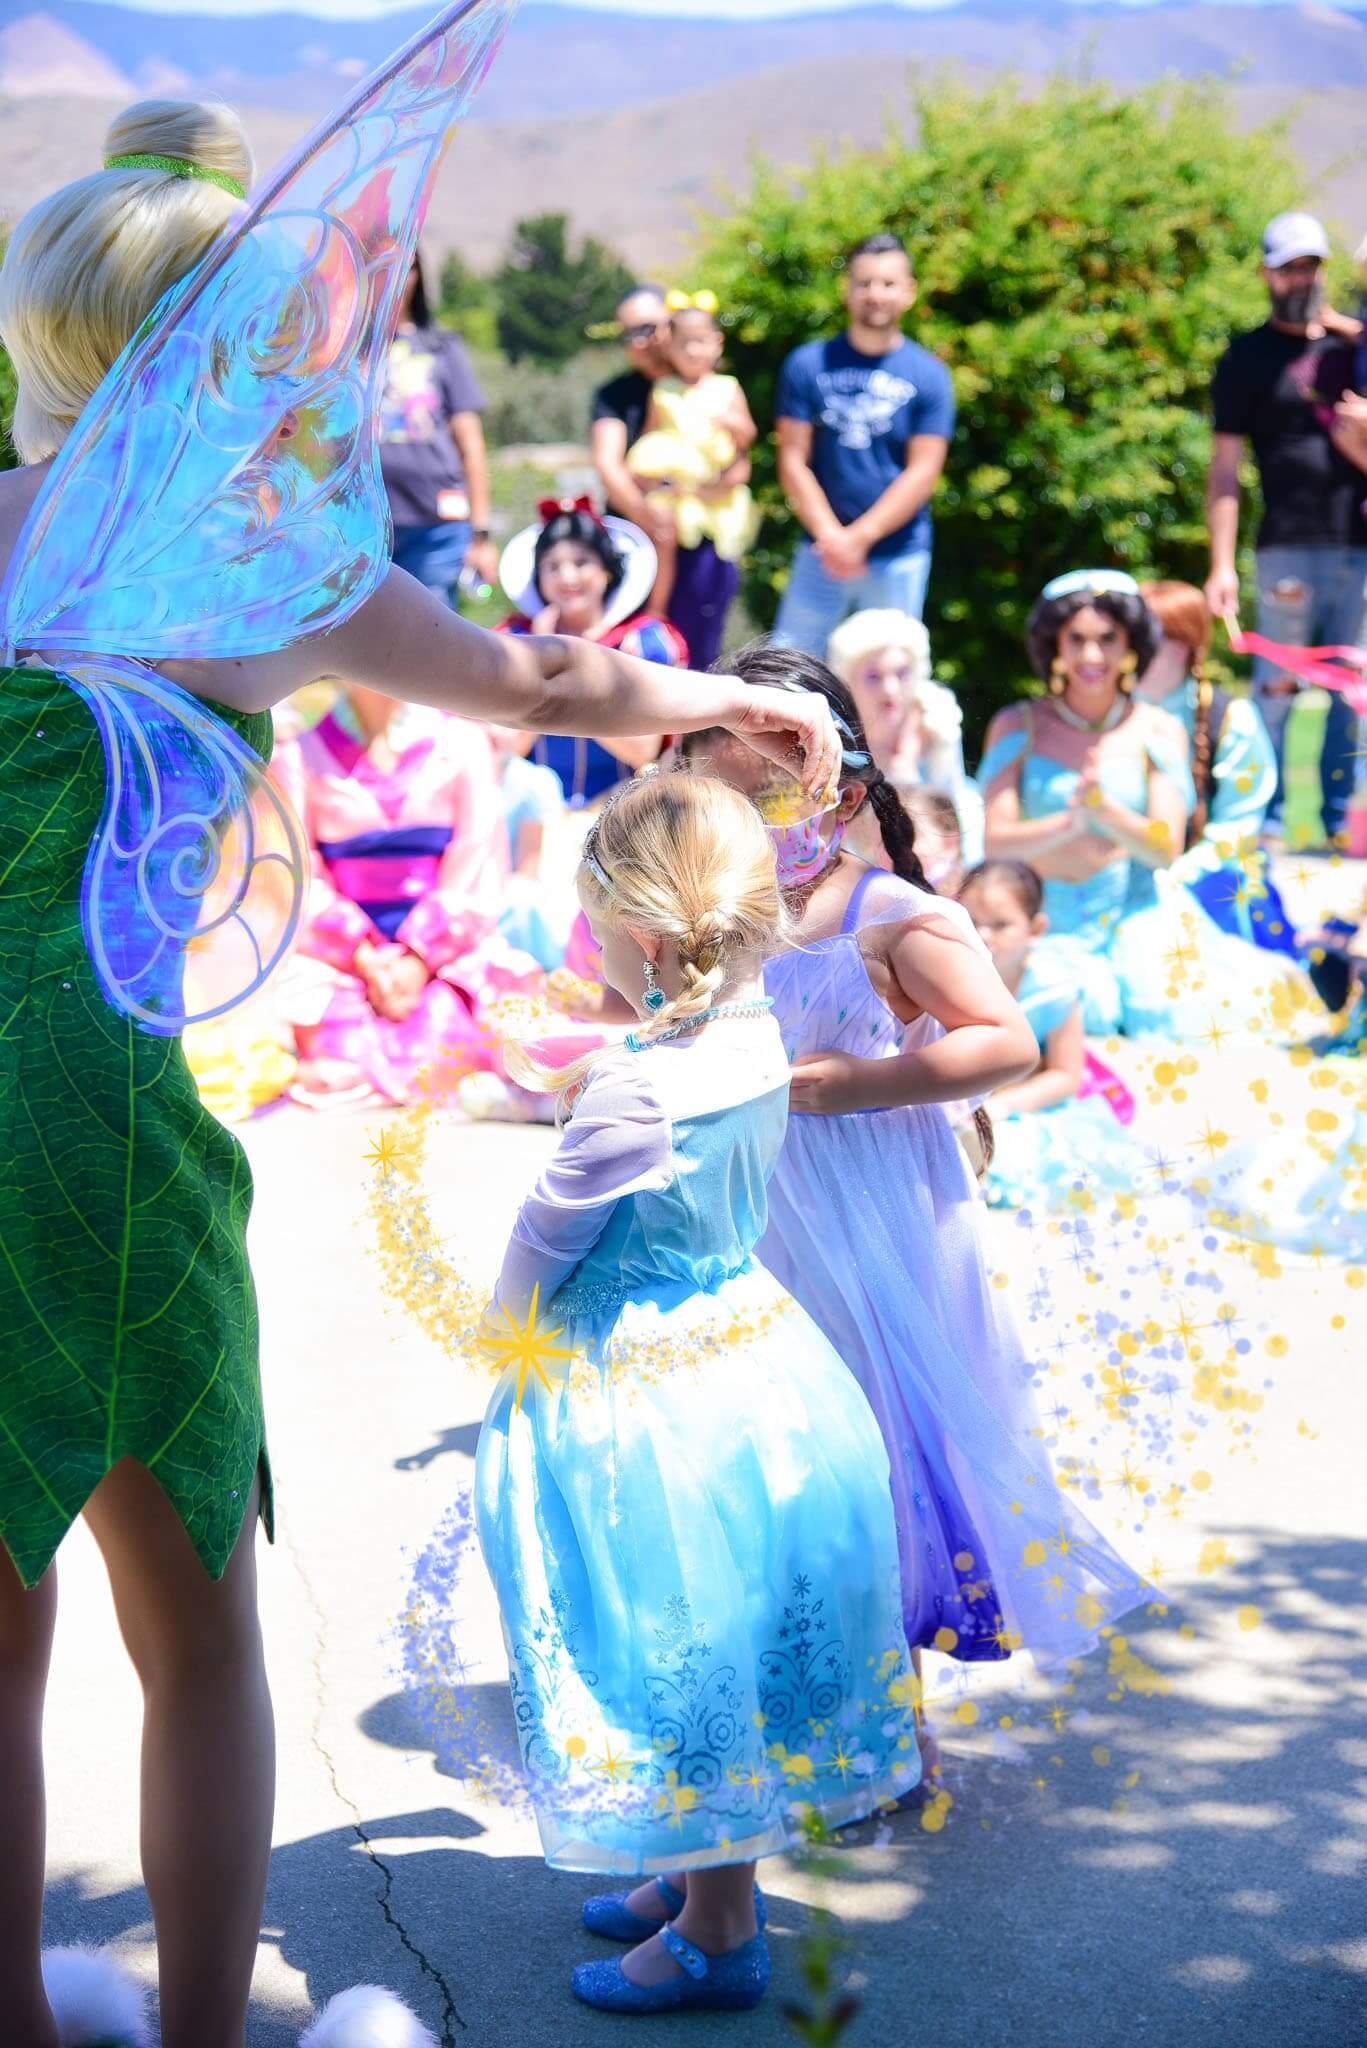 tinkerbell in park sparkles